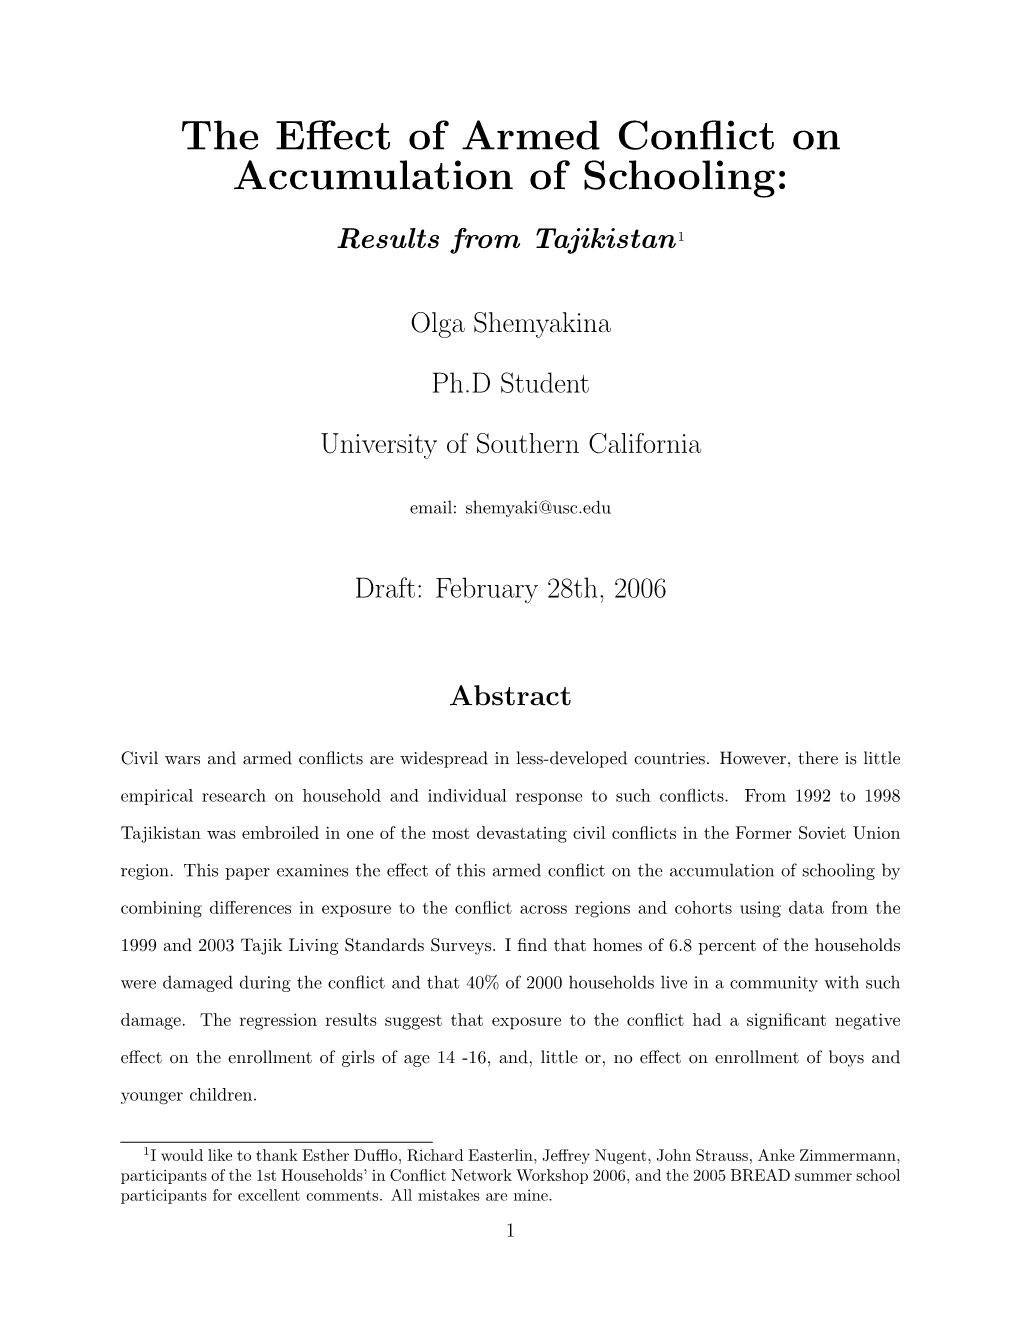 The Effect of Armed Conflict on Accumulation of Schooling